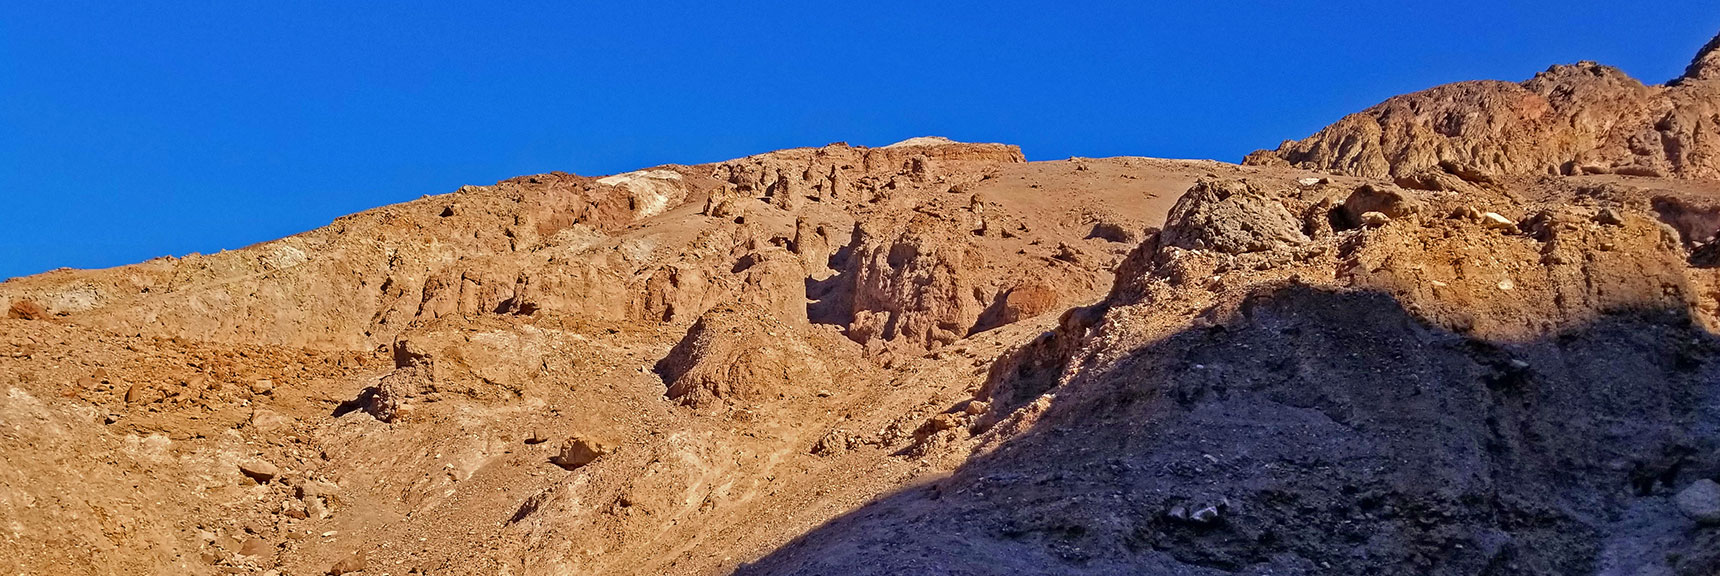 There are a Number of Potential Routes Up and Over the Sides of the Canyon Here | Natural Bridge Canyon | Death Valley National Park, California